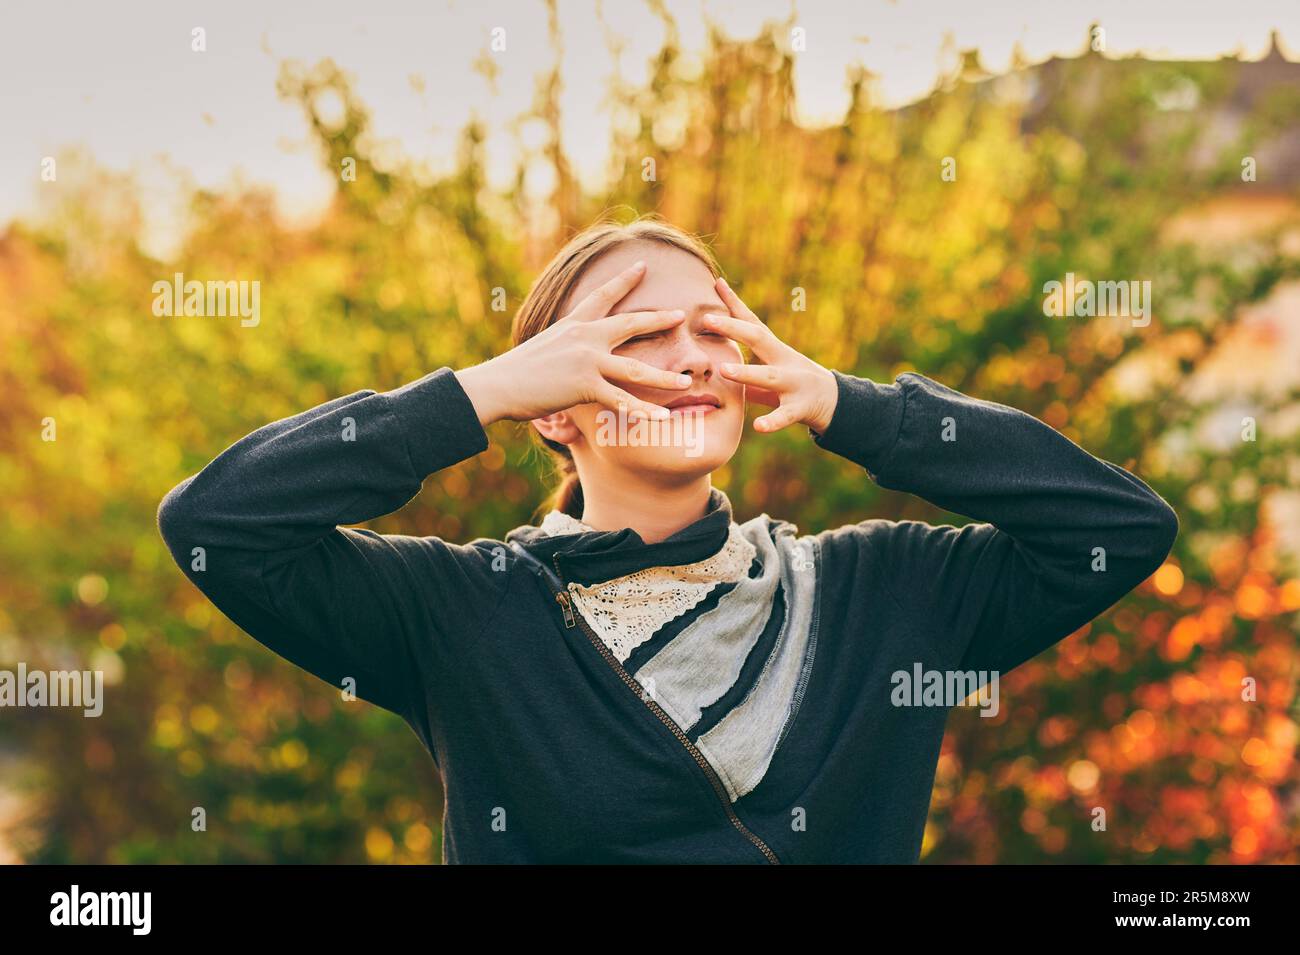 Outdoor portrait of young teen girl in golden light, hiding face with hands Stock Photo